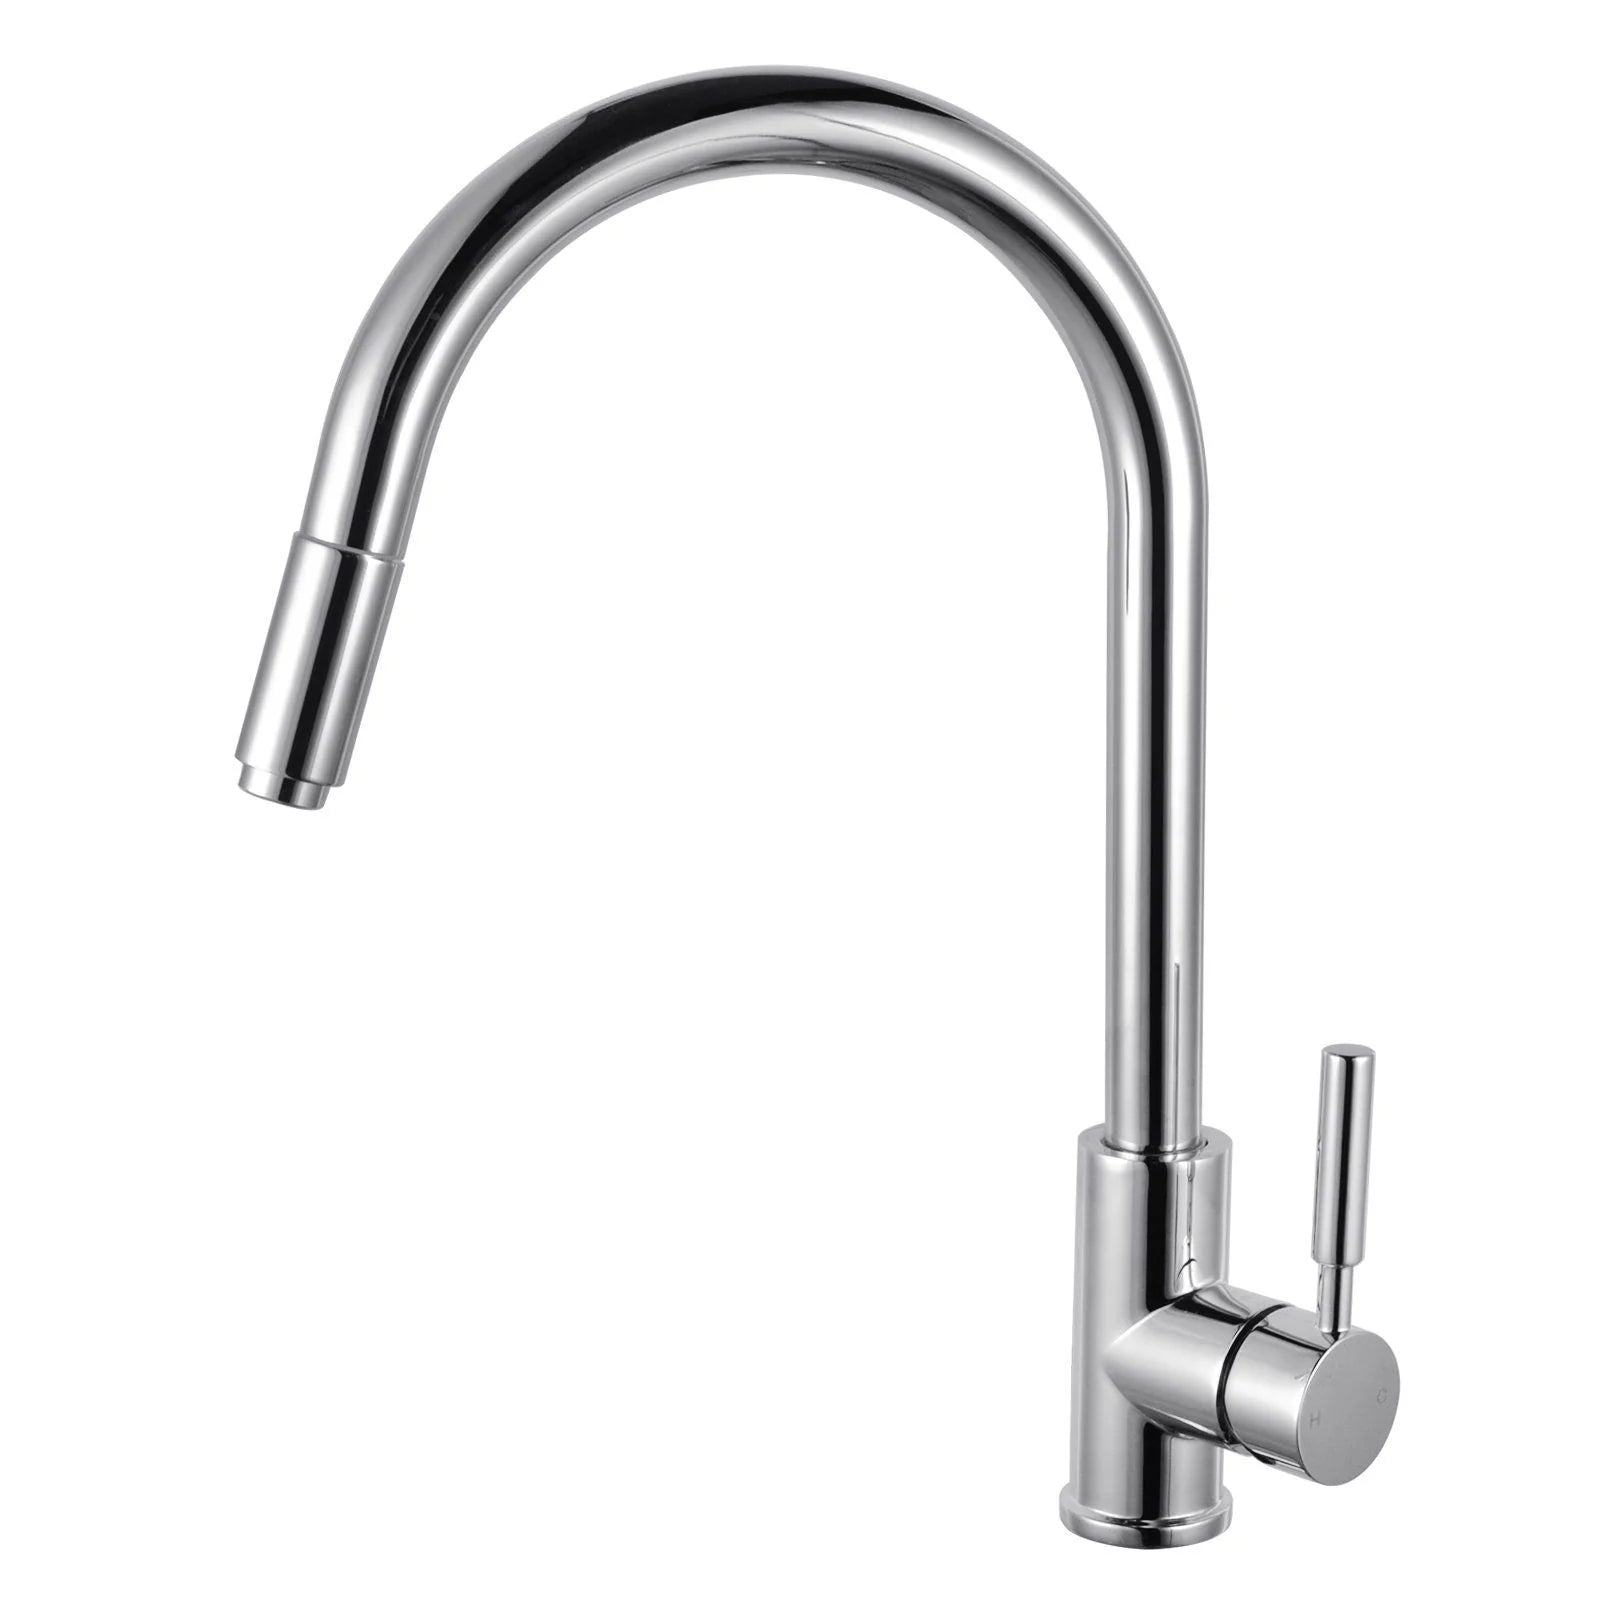 Round pull-out kitchen sink mixer tap with retractable nozzle - model 1016.KM-CH1016.KM